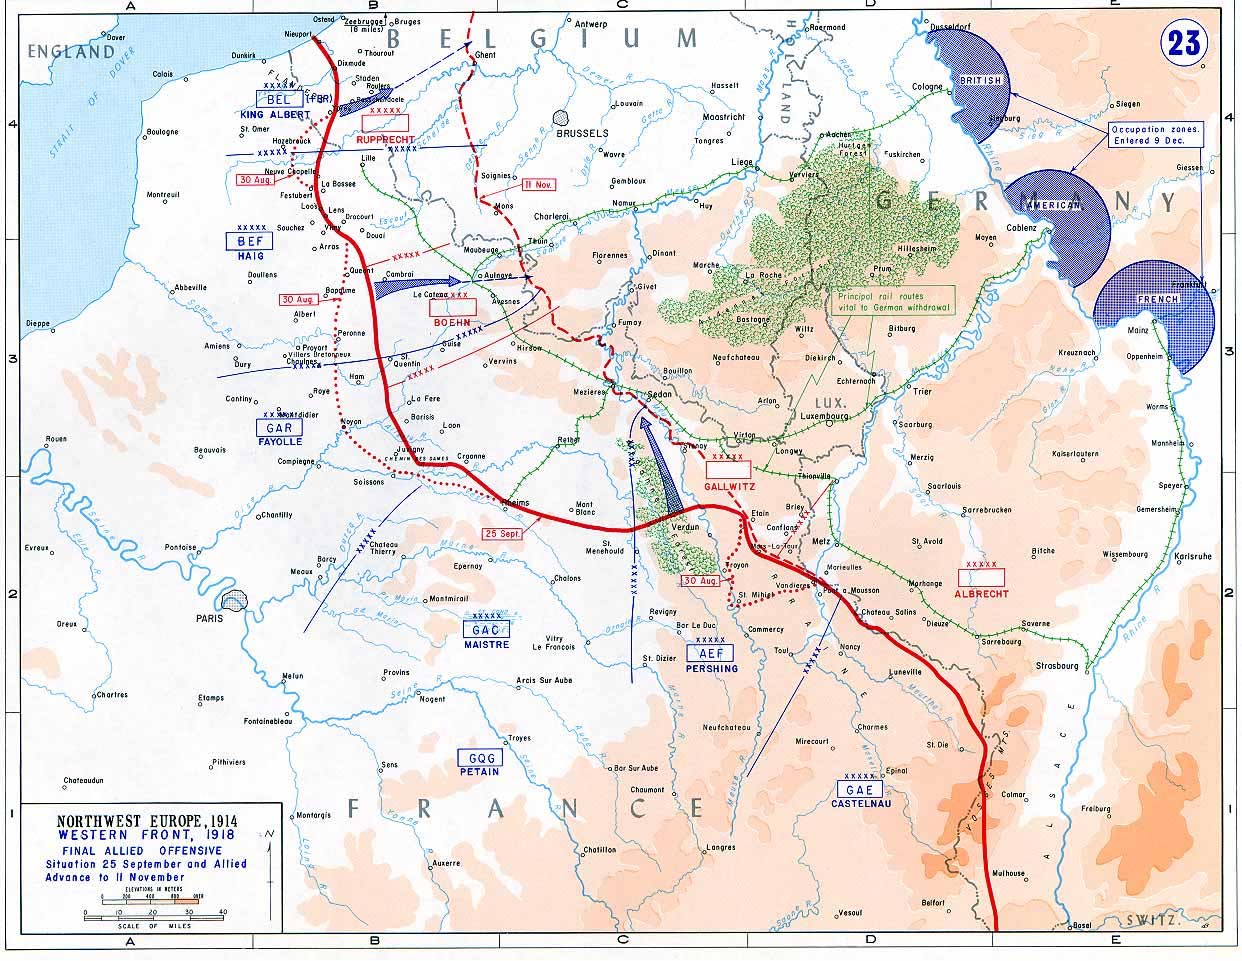 Western front 1918 - Final allied offensive